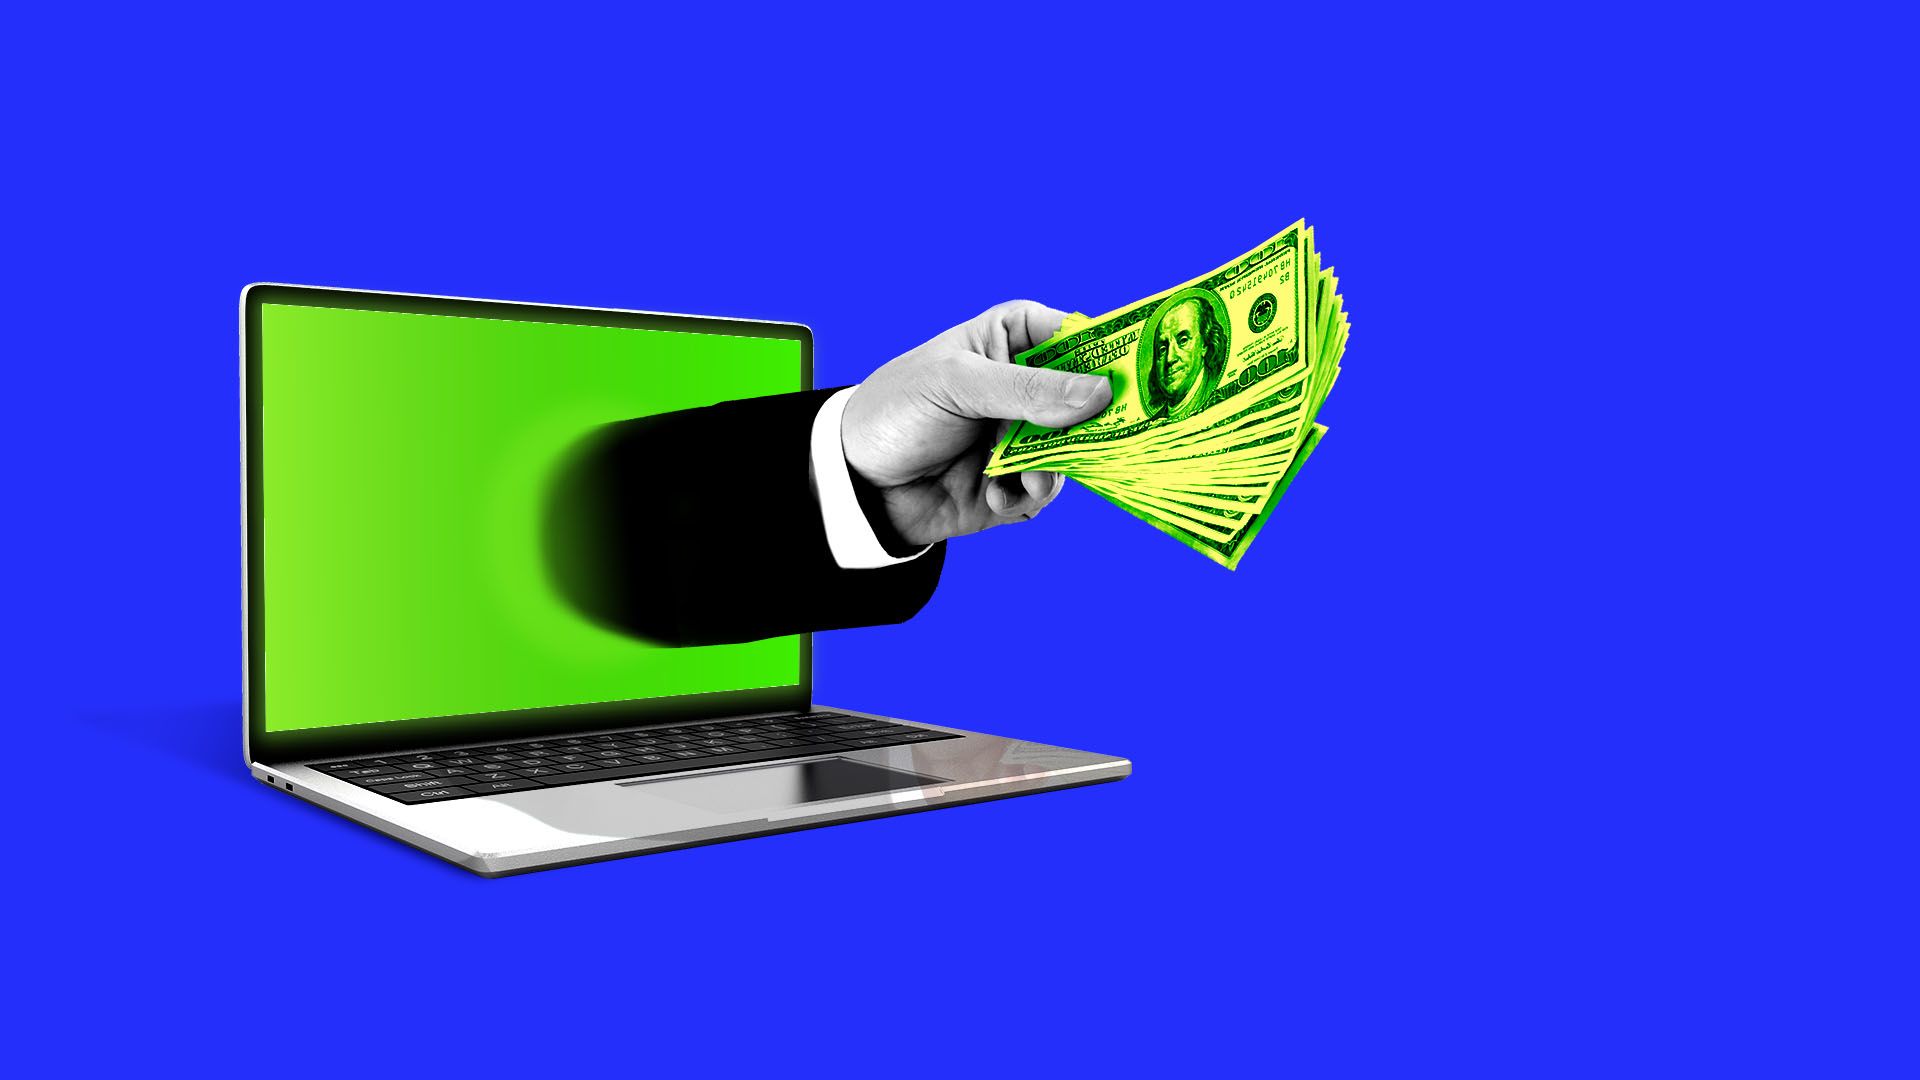 Illustration of hand with money reaching out of a computer screen